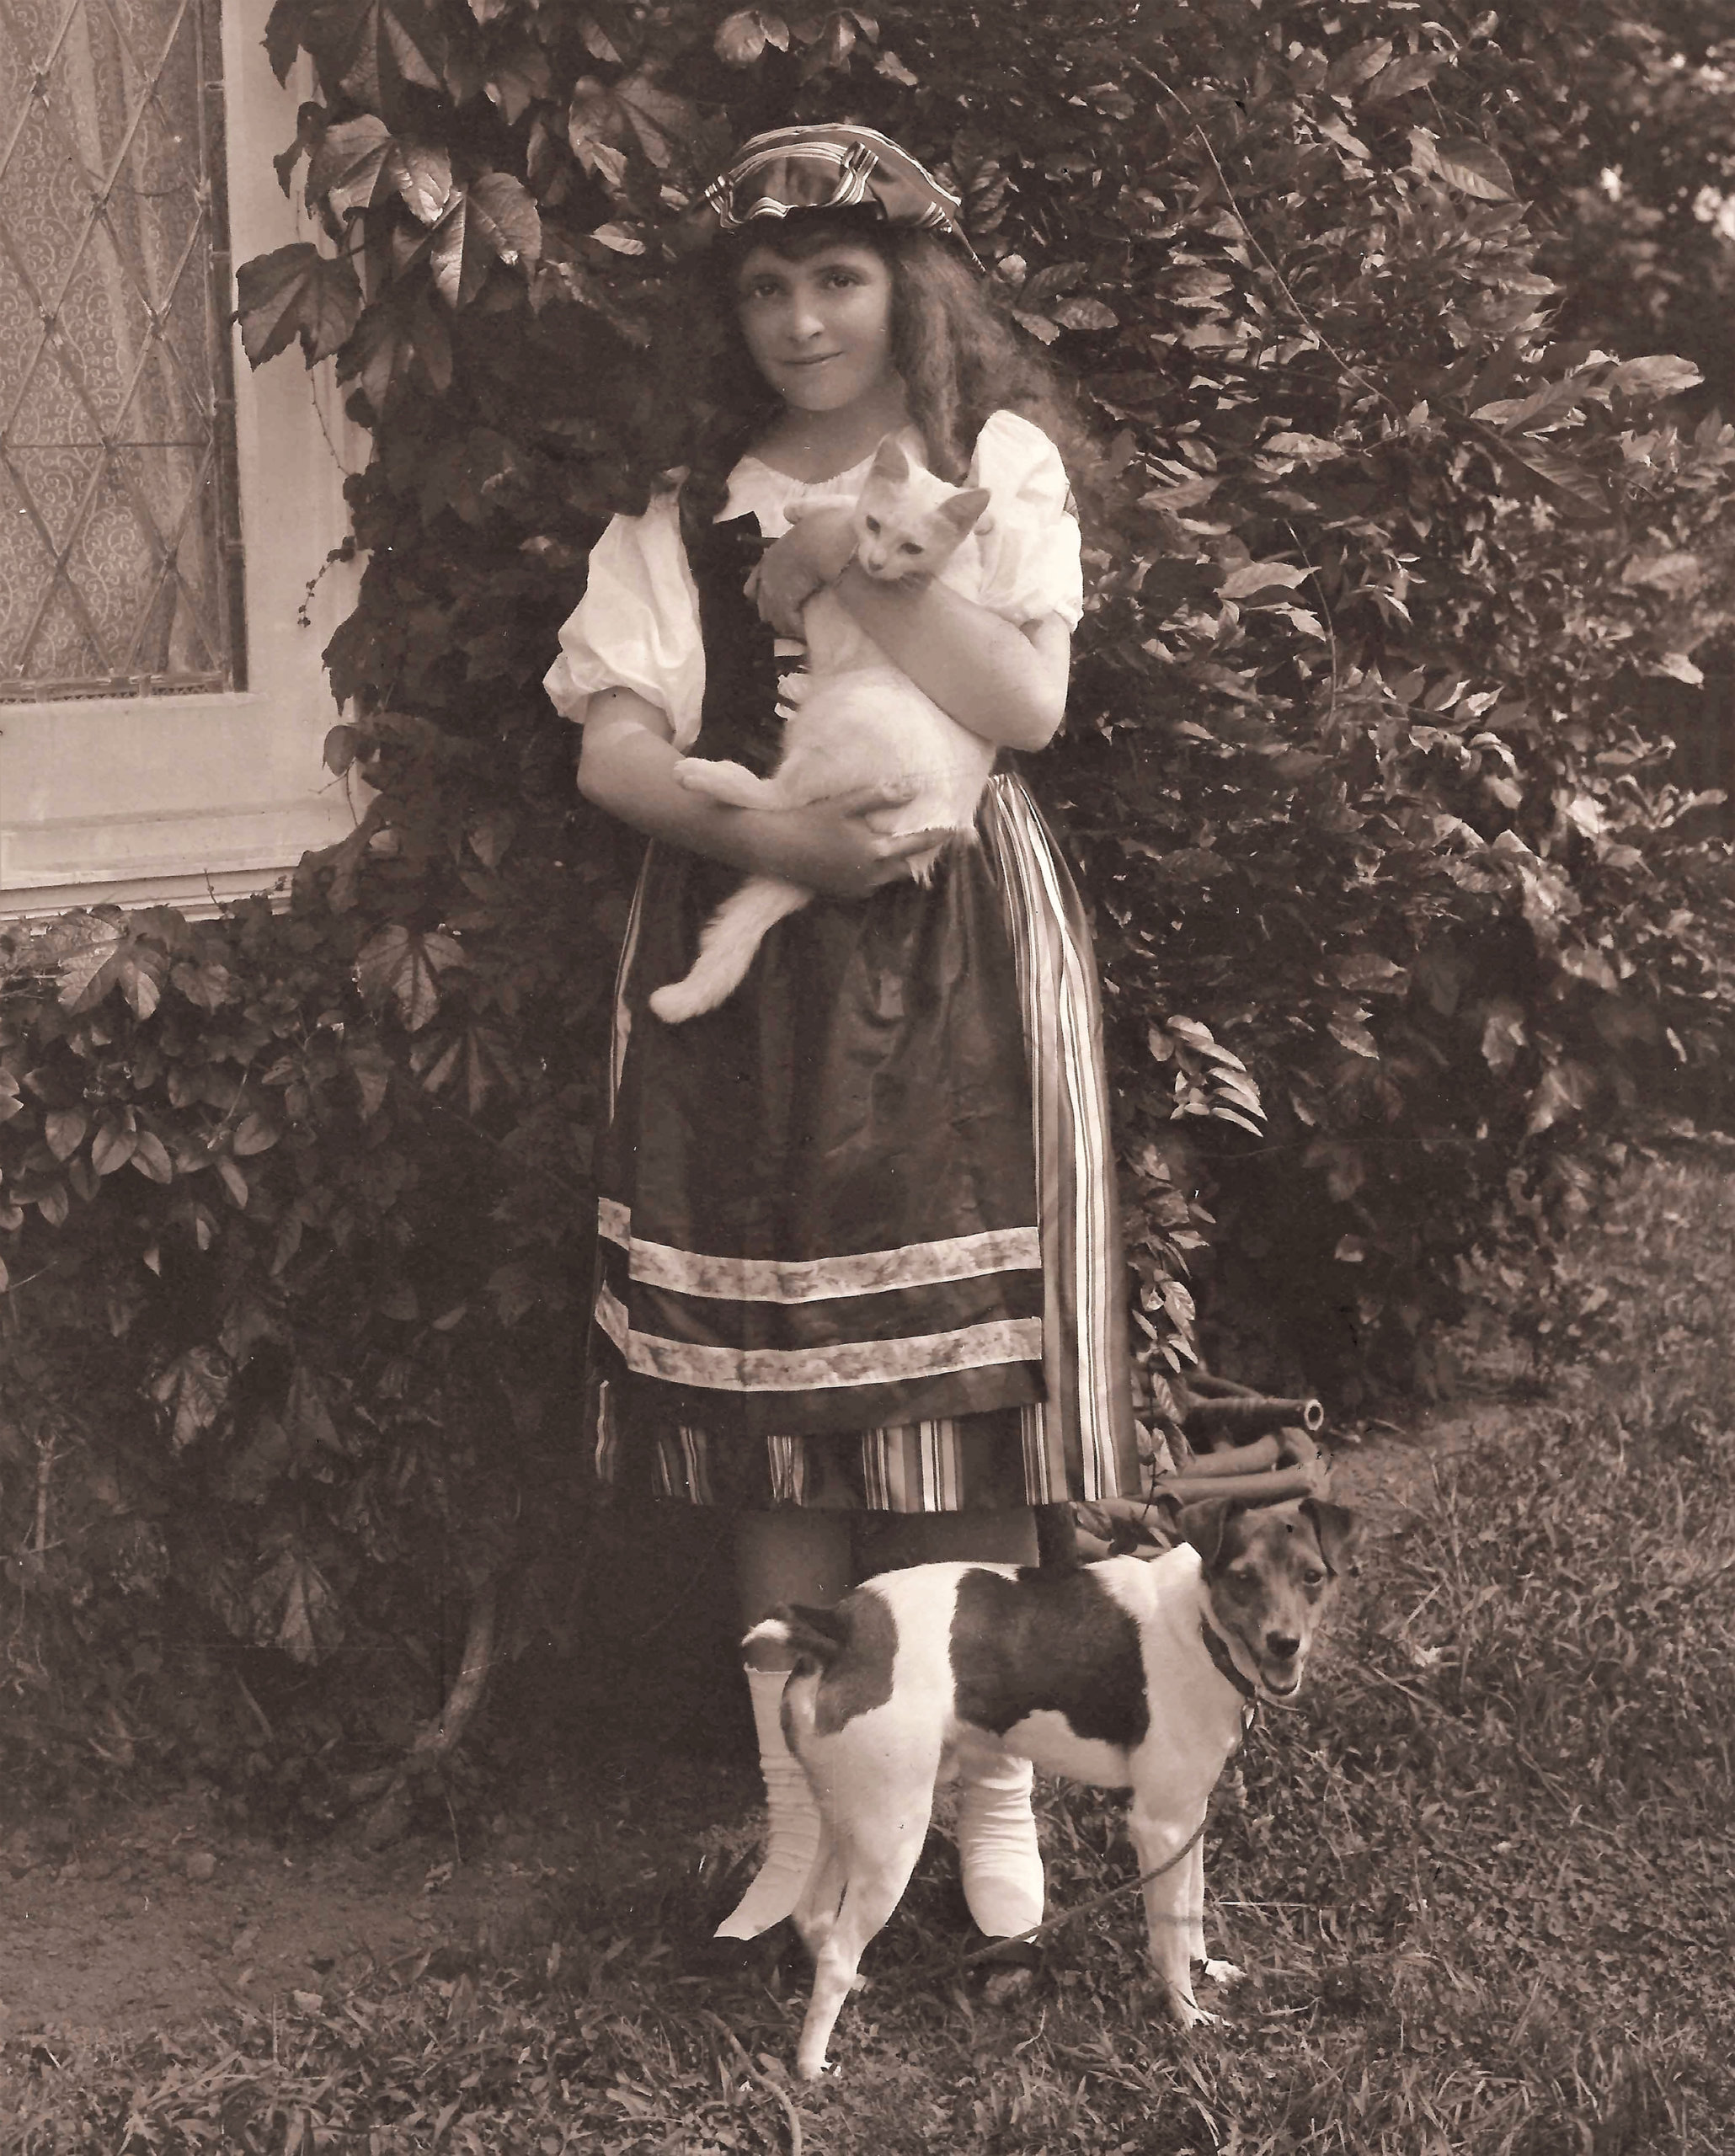 Rose de Rose with pets, photo c. 1910, Southampton History Museum Collections